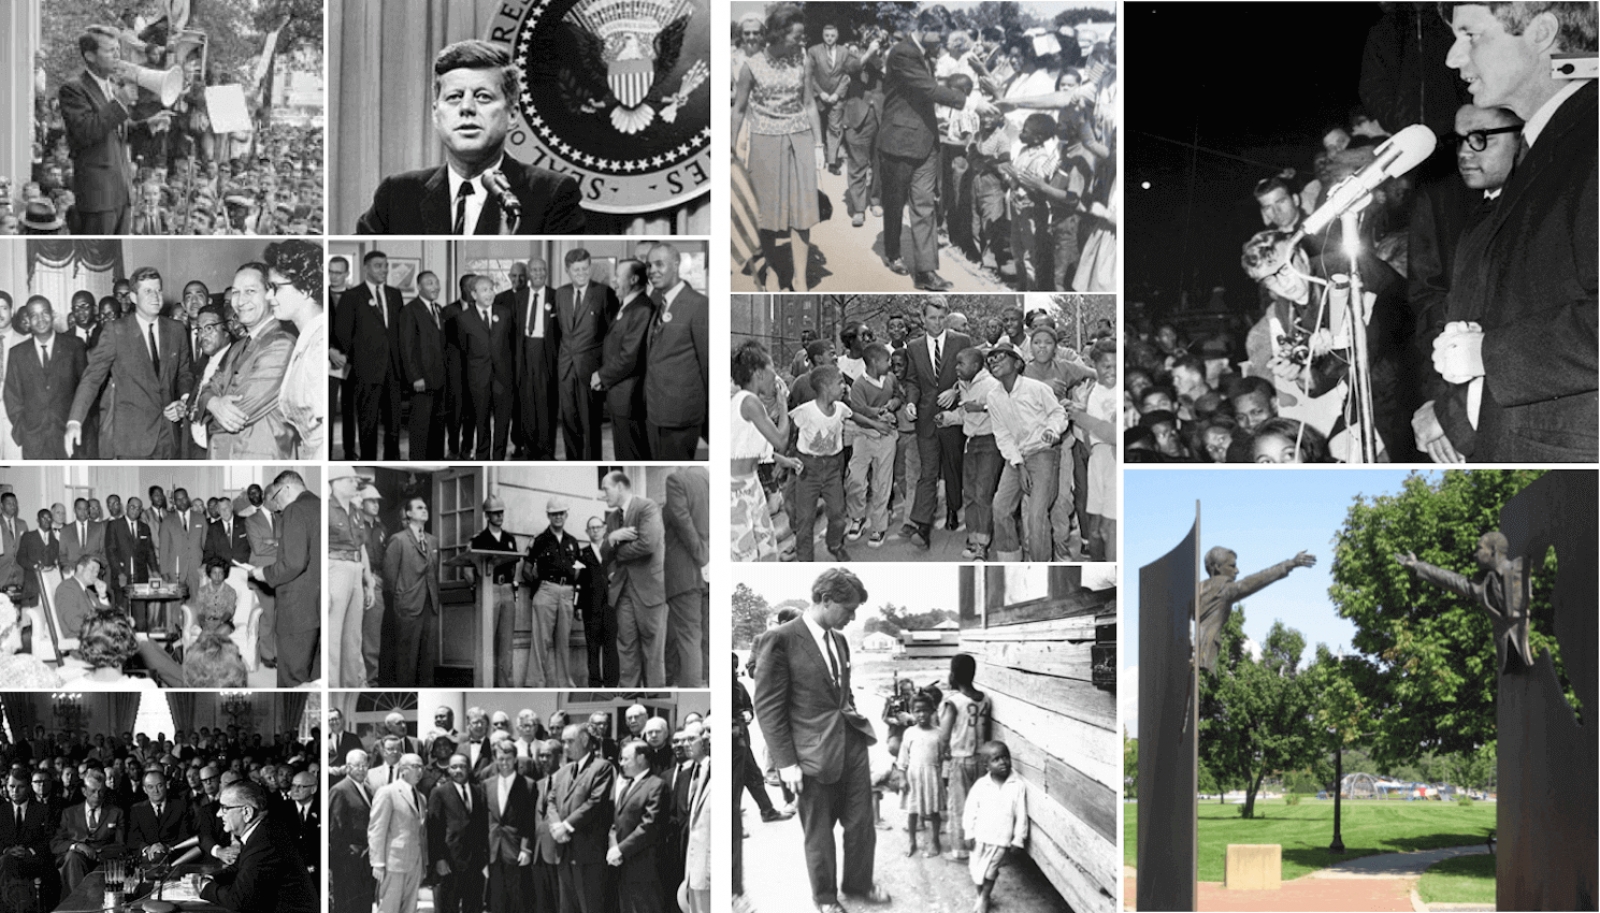 The Kennedys and Civil Rights:  How the MSM Continues to Distort History, Part 2